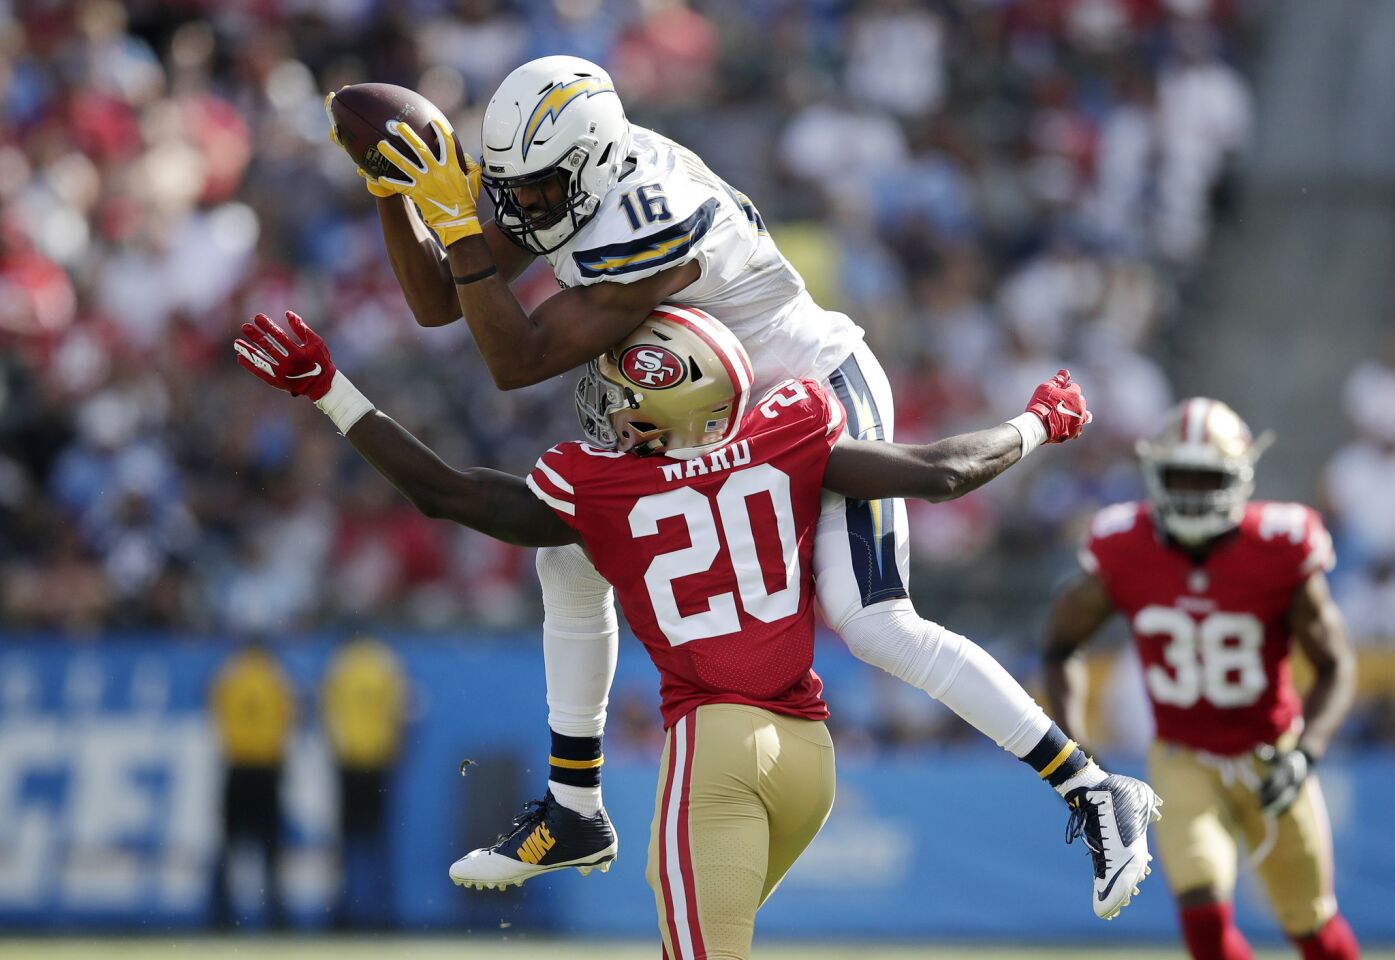 Los Angeles Chargers wide receiver Tyrell Williams, top, makes a catch while under pressure from San Francisco 49ers defensive back Jimmie Ward during the second half of an NFL football game, Sunday, Sept. 30, 2018, in Carson, Calif.